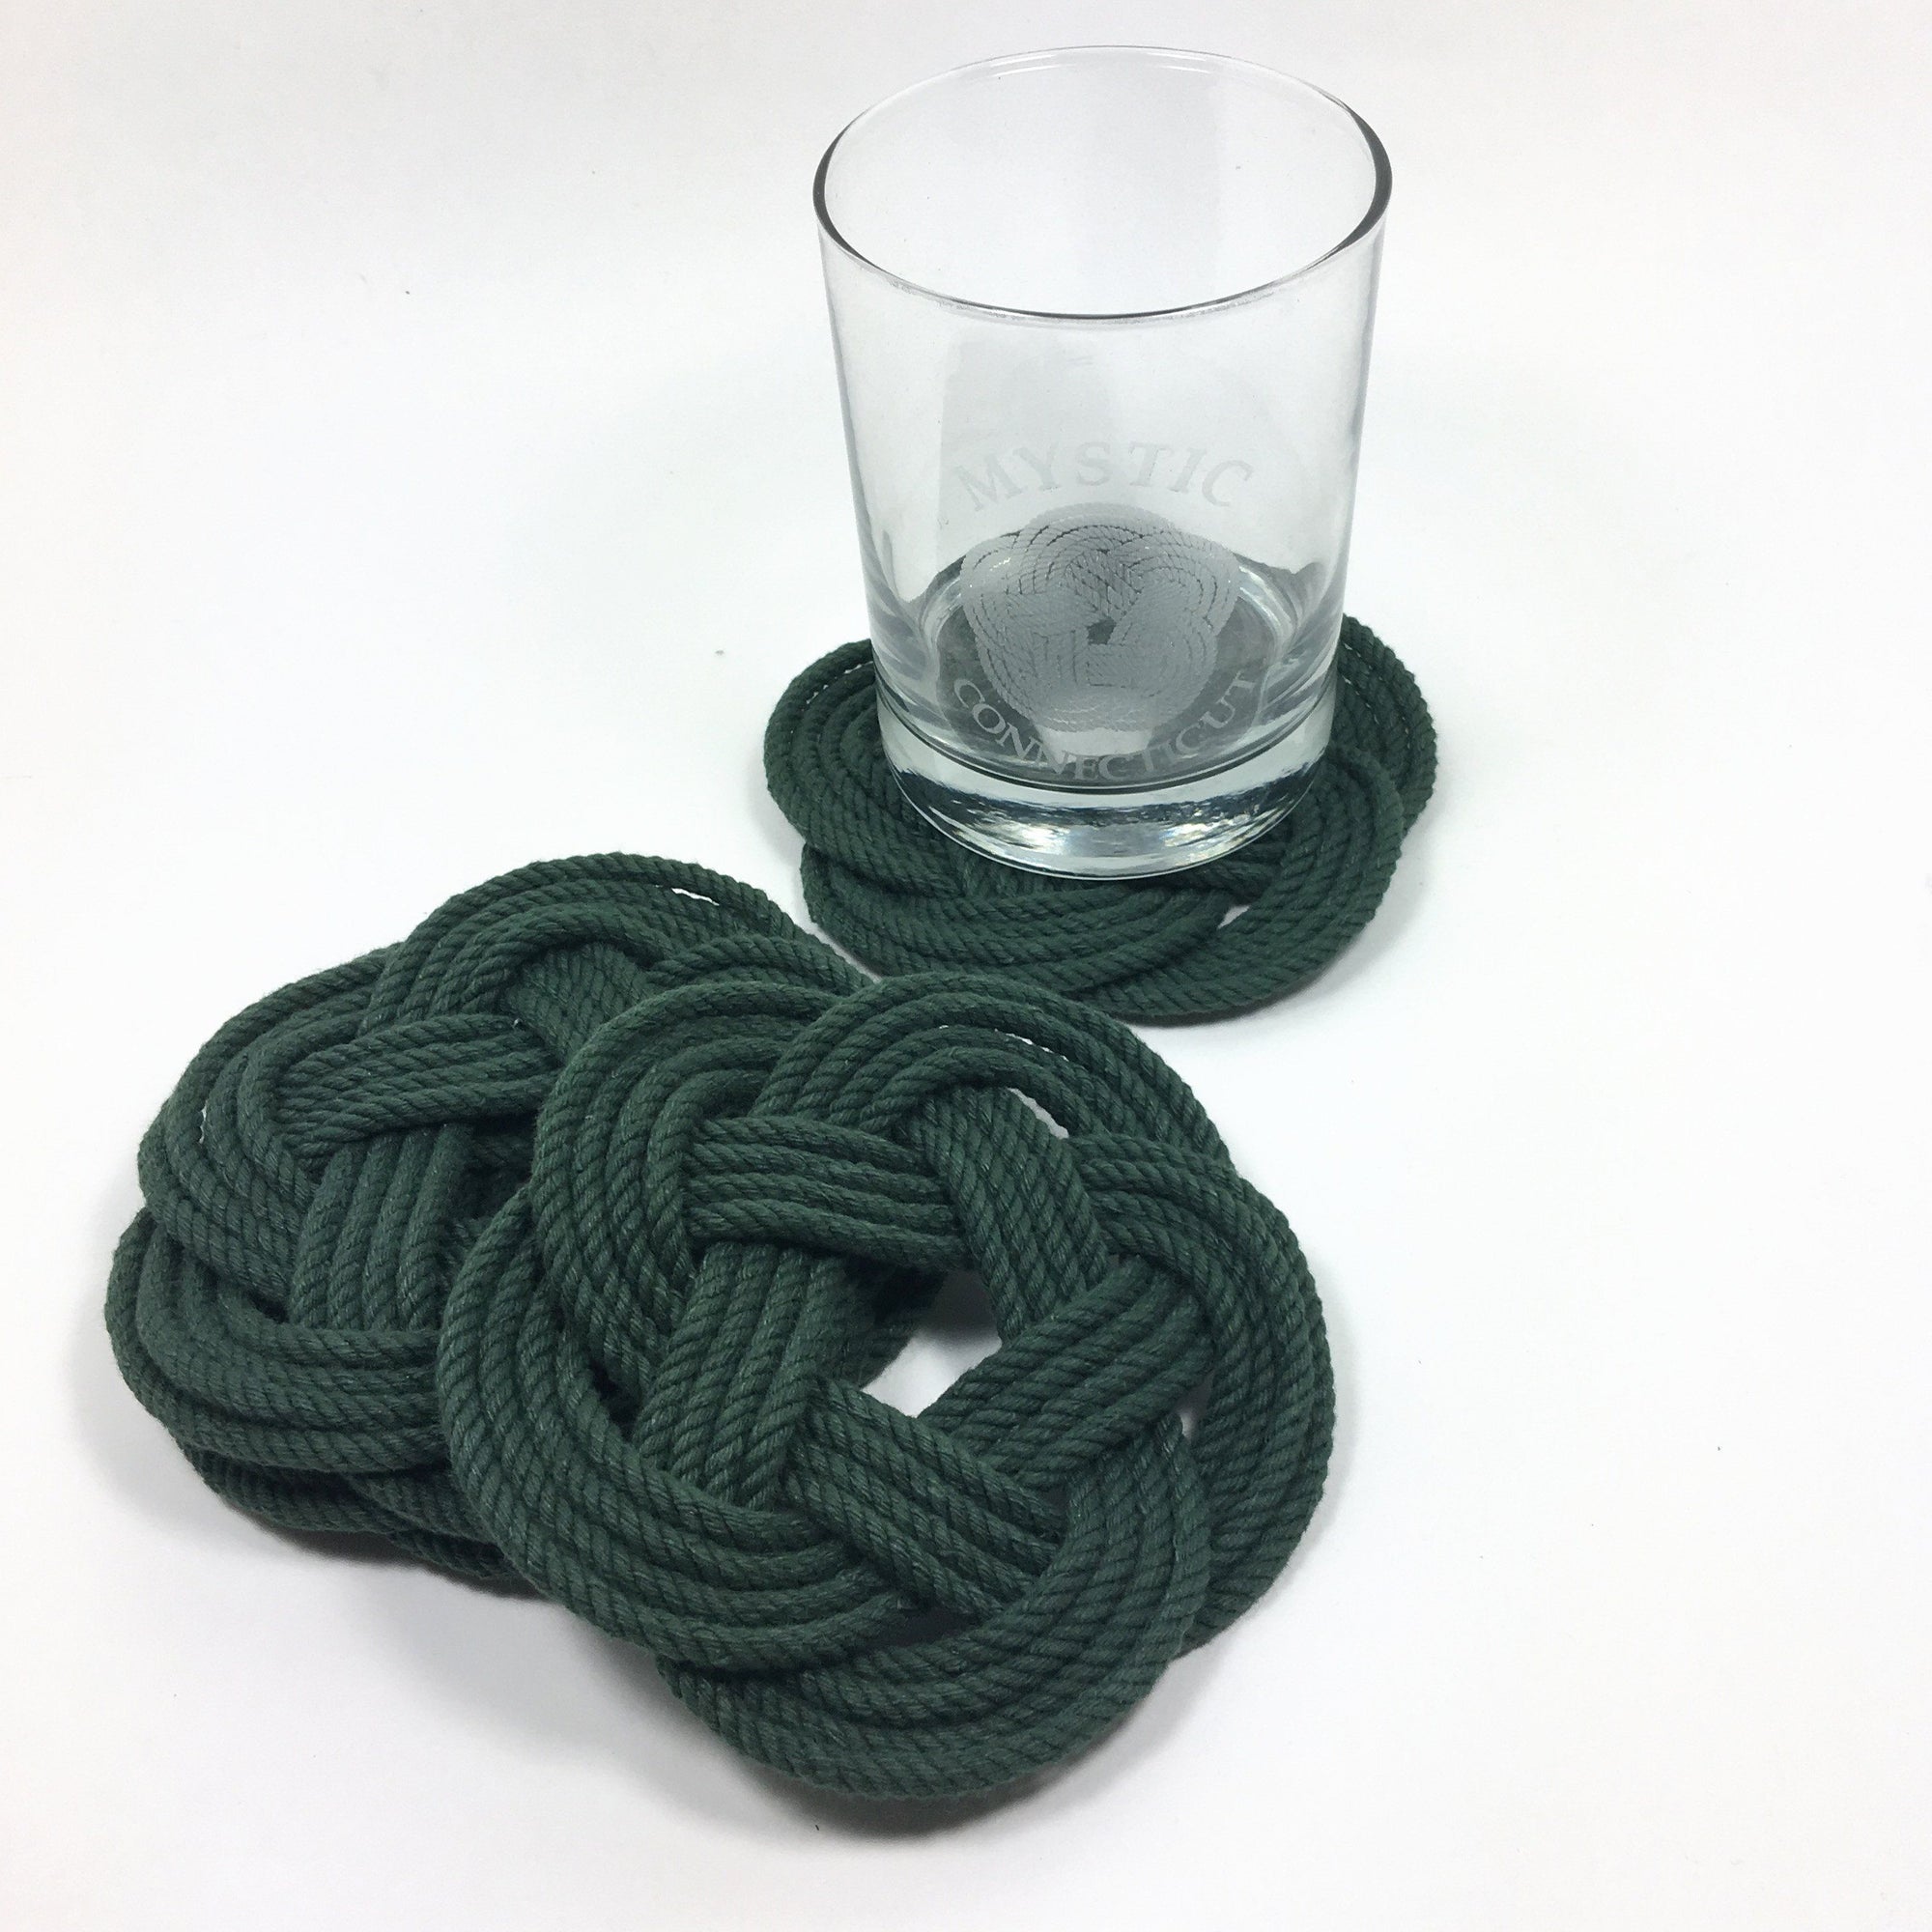 Nautical Knot Sailor Knot Coasters, Forest Green , Set of 4 handmade at Mystic Knotwork